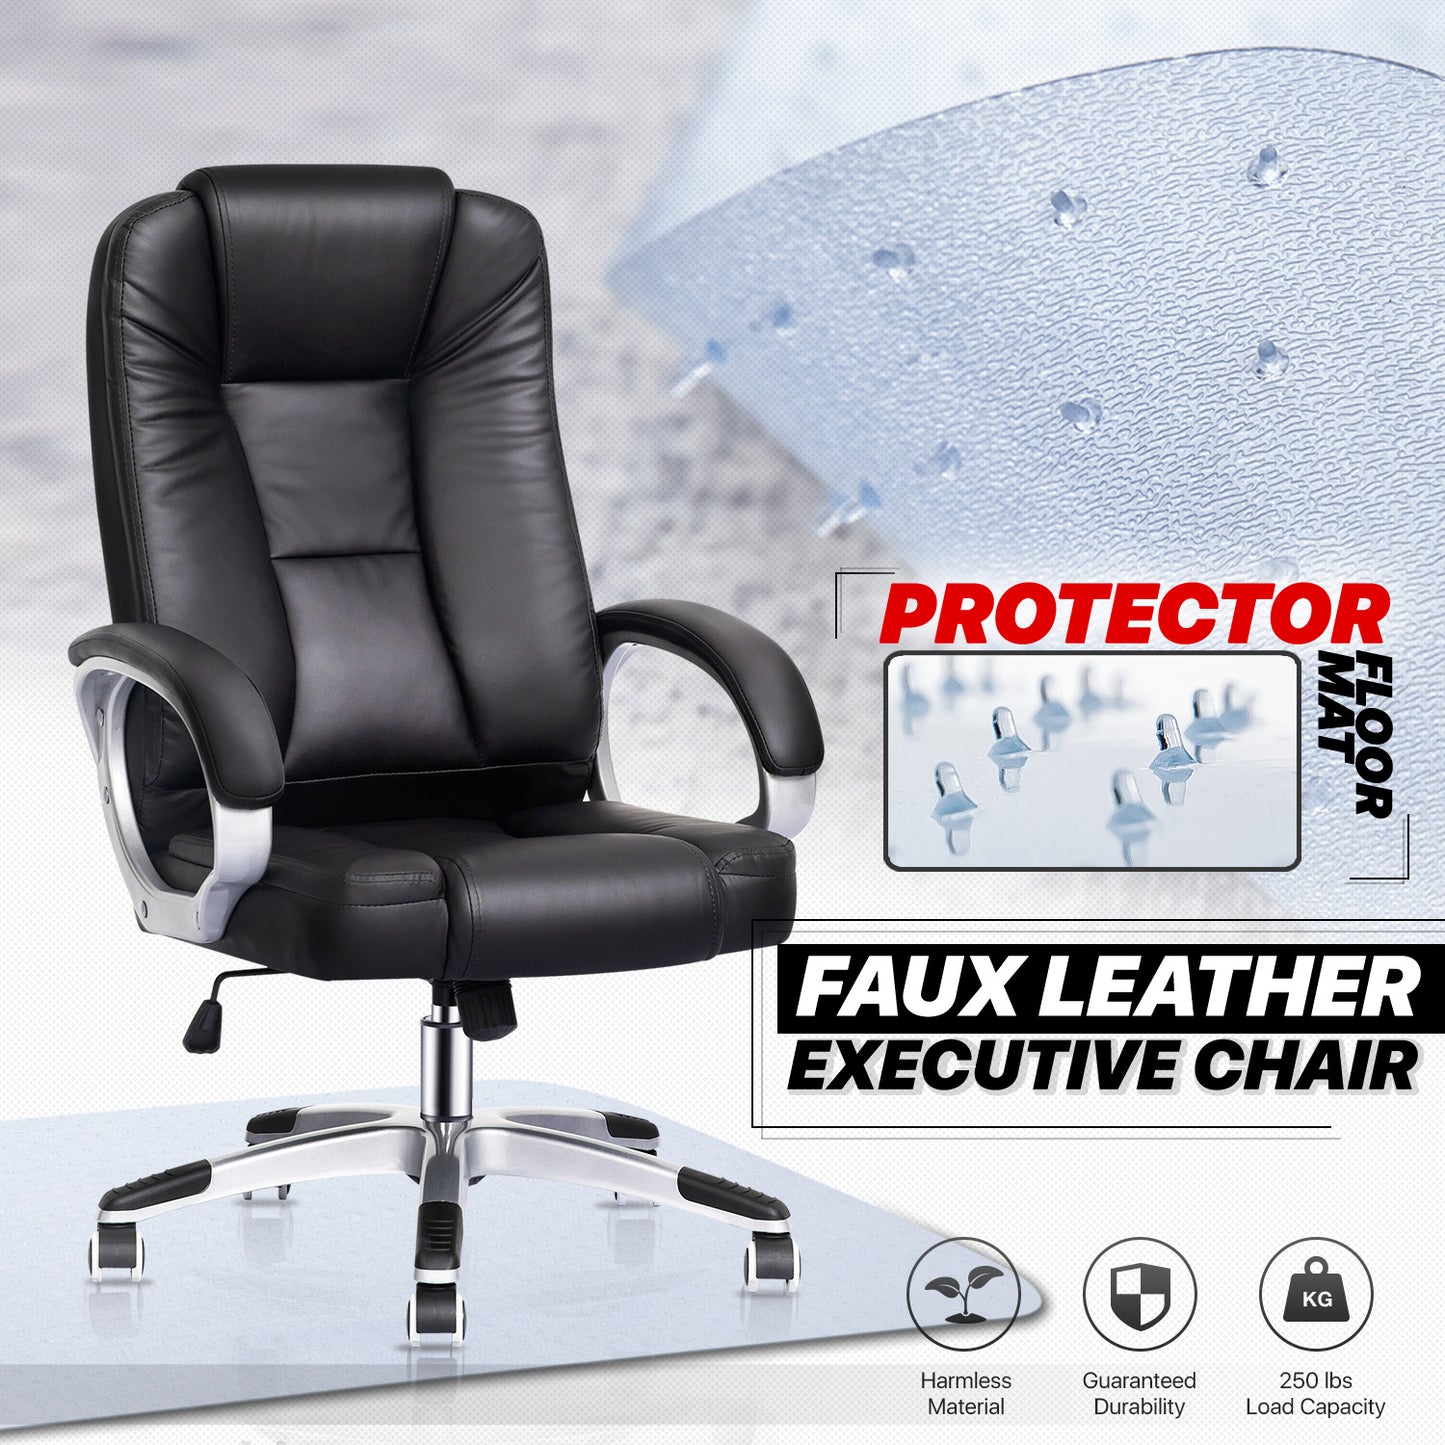 Faux Leather Executive Chair - 29" x 47" Studded Mat Set